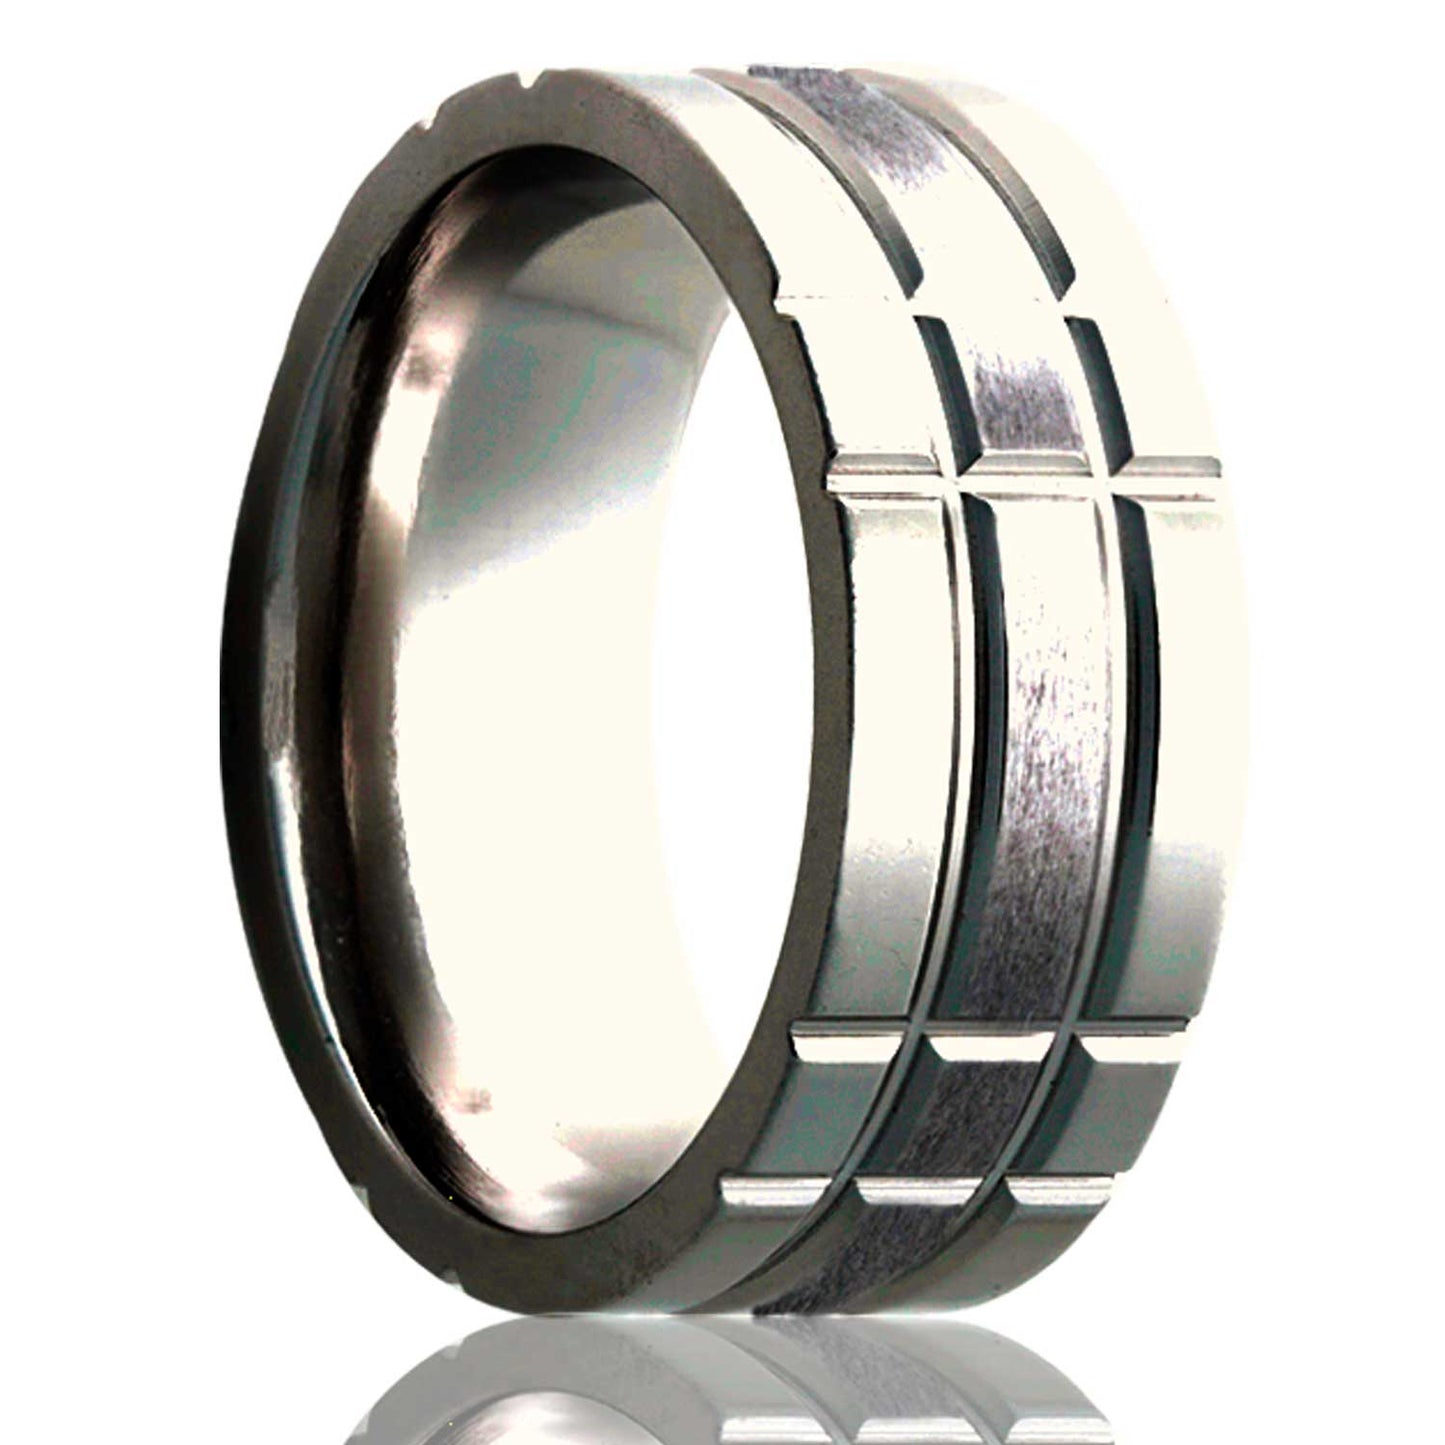 A intersecting grooves satin finish cobalt wedding band displayed on a neutral white background.